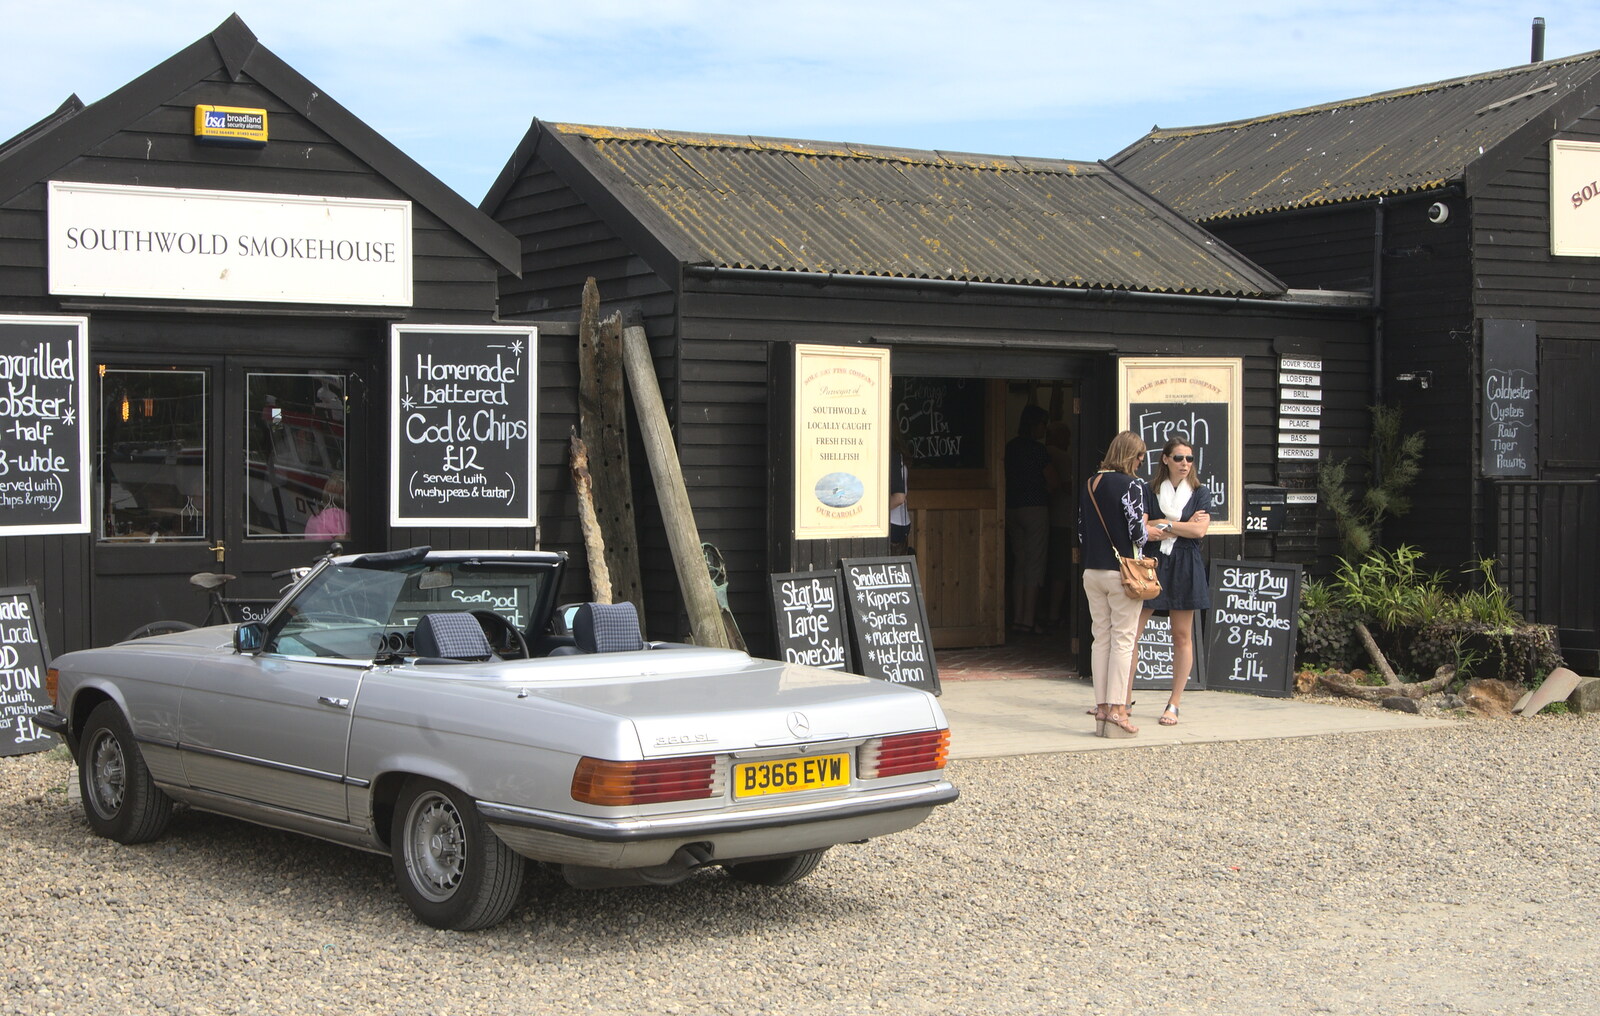 A nice old Mercedes convertible from The Danger of Trees: A Camping (Mis)adventure - Southwold, Suffolk - 3rd August 2015